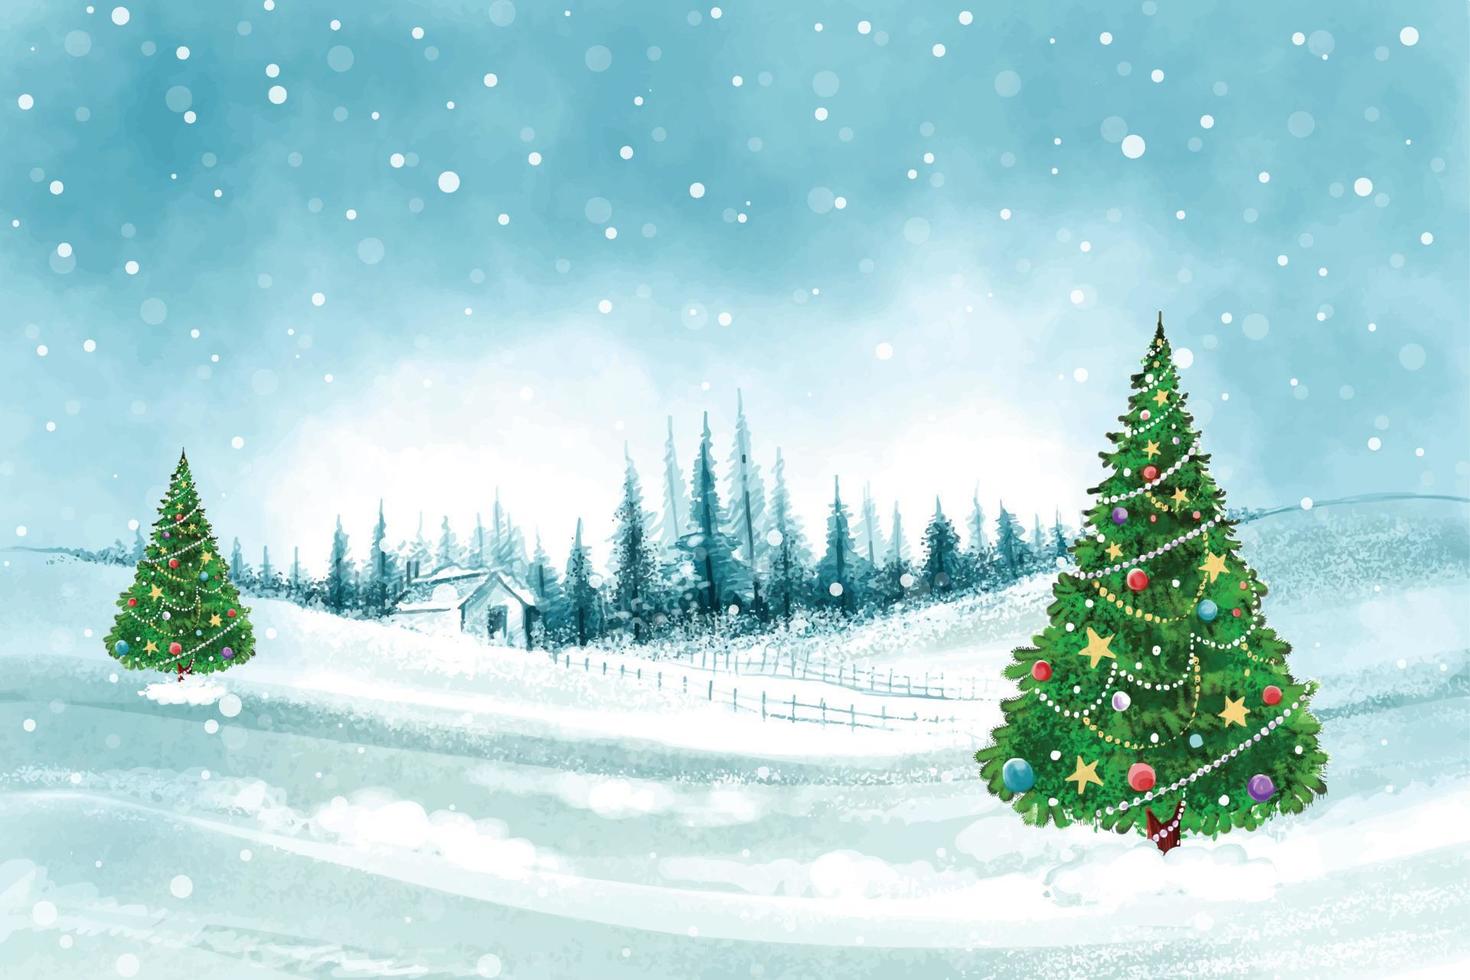 Impressive christmas trees in winter landscape with snow card background vector